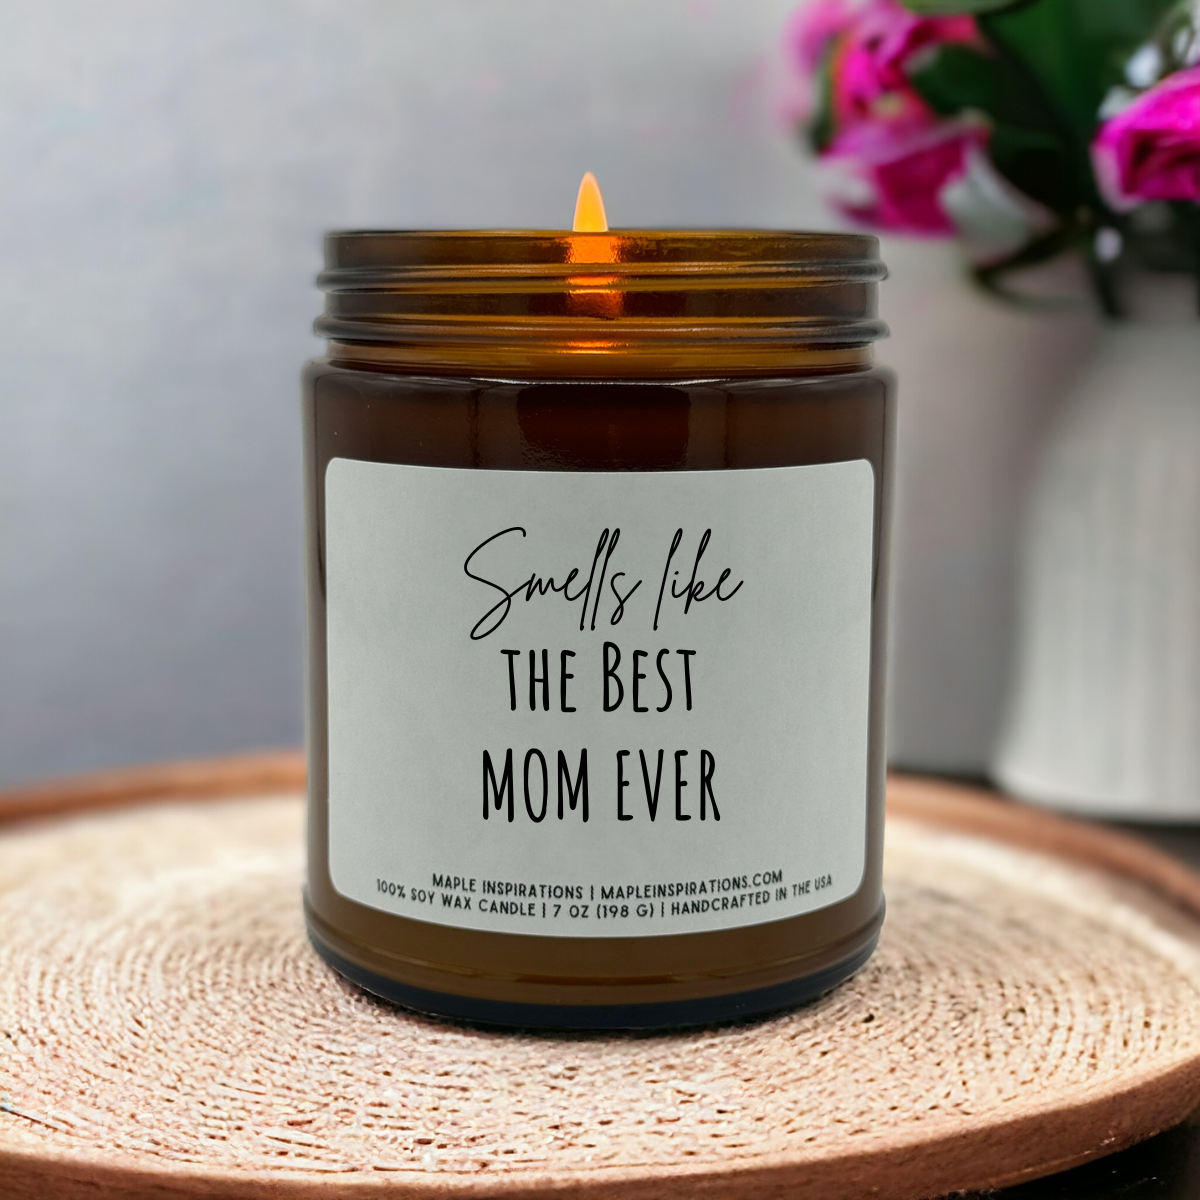 Smells like the Best Mom Ever Candle Gift for Mum, Scented Soy Candle, Mother's Day Gift for Her, Candle For Mom, Gift for Mothers Day, Mothers Day Candle for Mom, Mom Birthday, Mom Gift From Daughter / Son